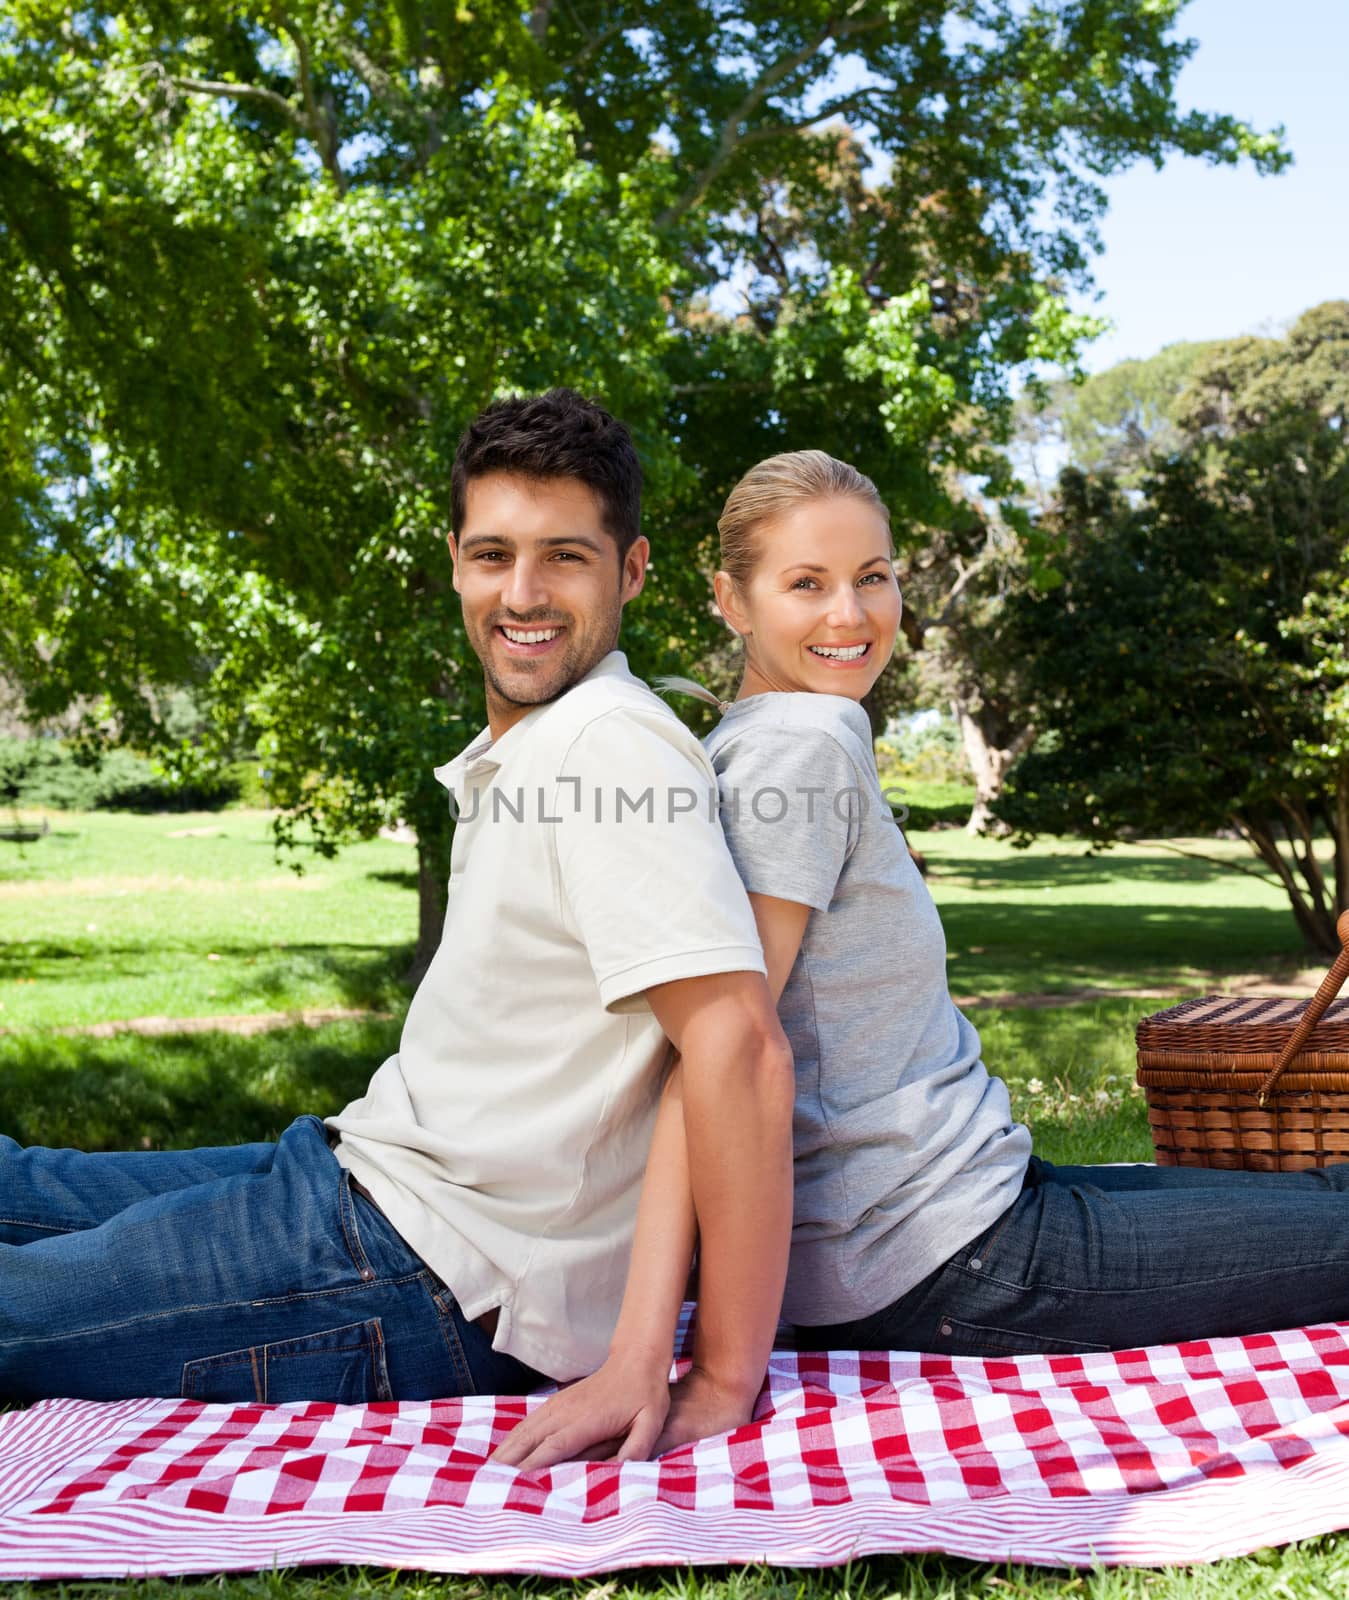 Lovers picnicking in the park during the summer